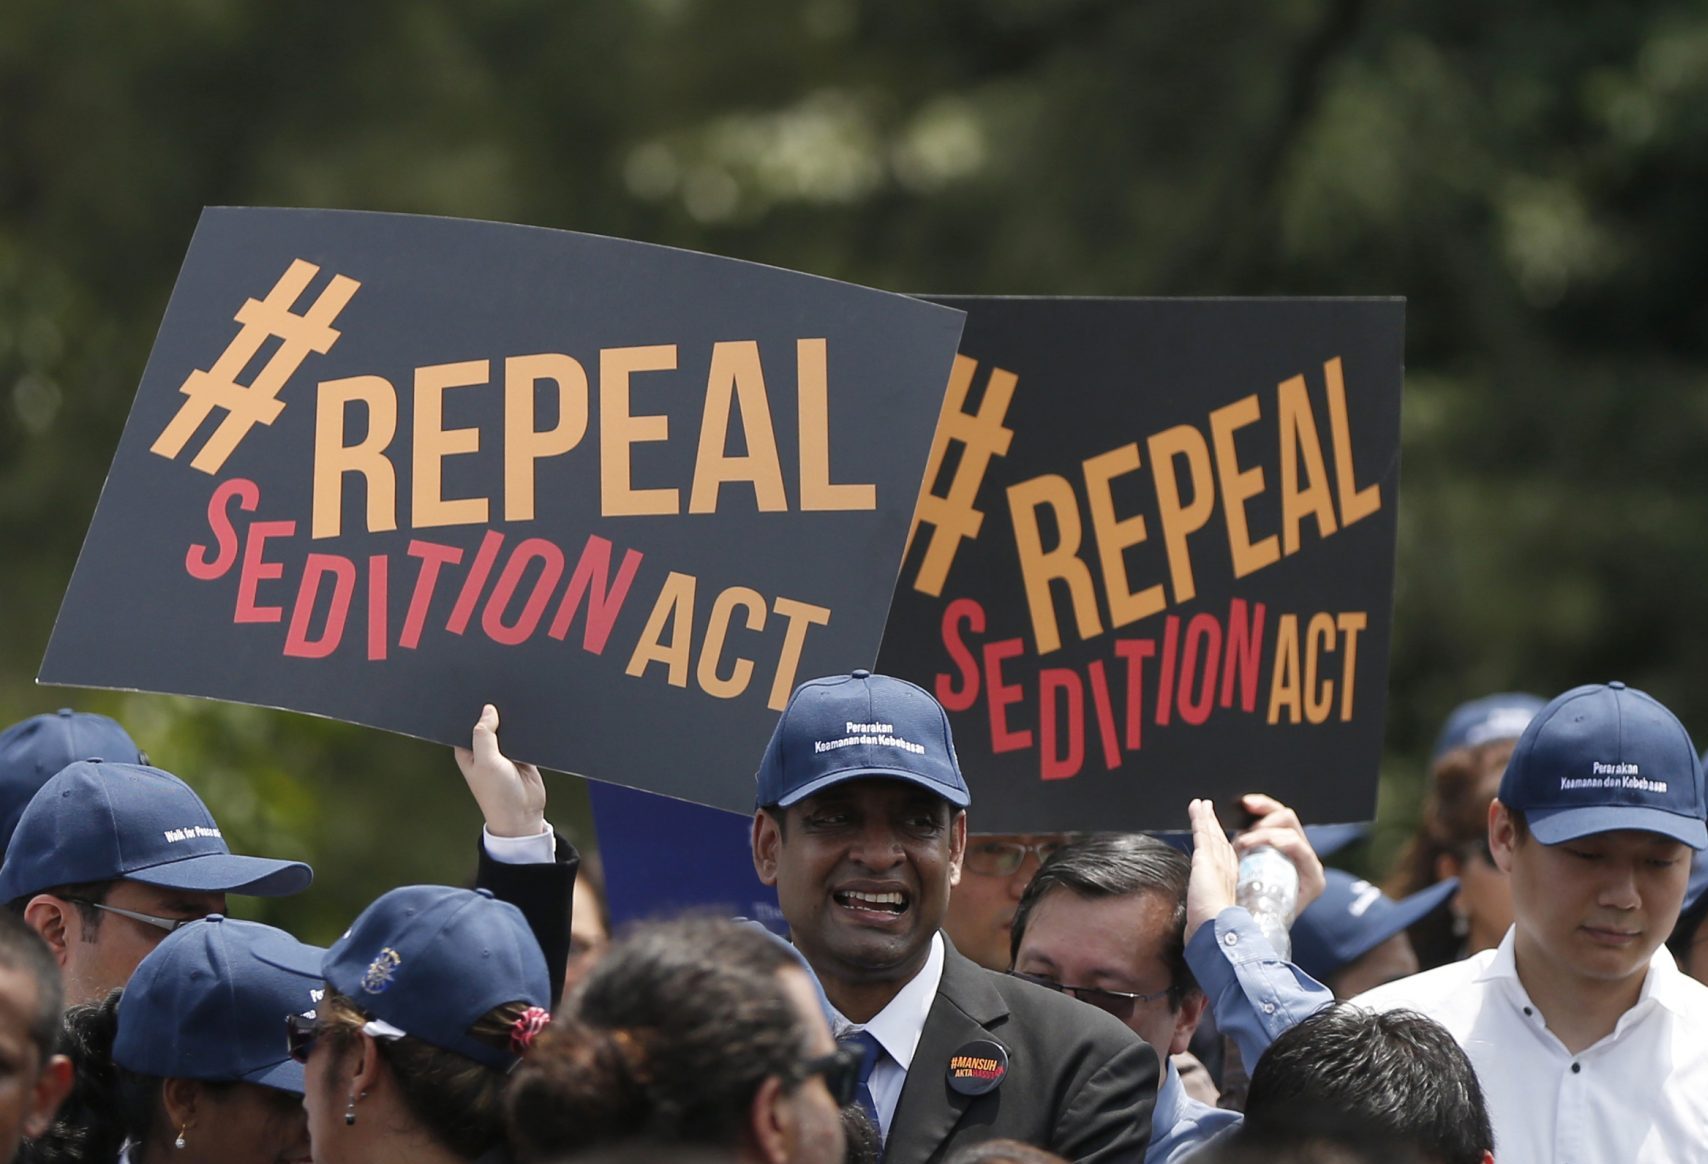 Protesters hold signs that read '#RepealSeditionAct'